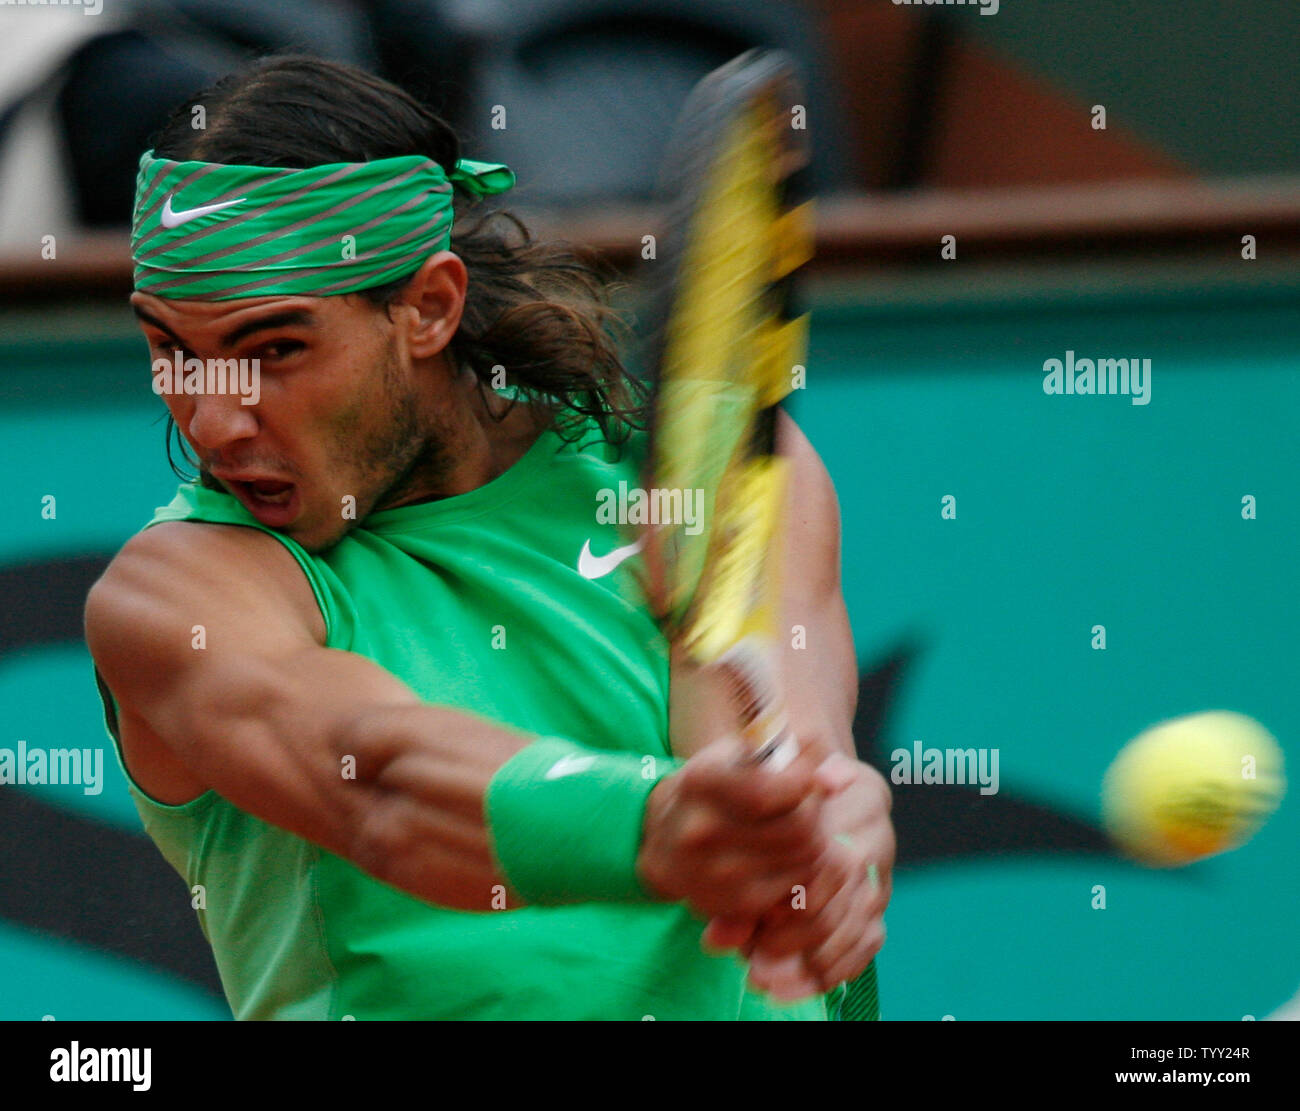 Rafael Nadal of Spain hits a backhand during his fourth round match with Fernando Verdasco of Spain at the French Tennis Open in Paris on June 1, 2008.  The second-seeded Nadal defeated Verdasco in straight sets 6-0, 6-0.   (UPI Photo/ David Silpa) Stock Photo